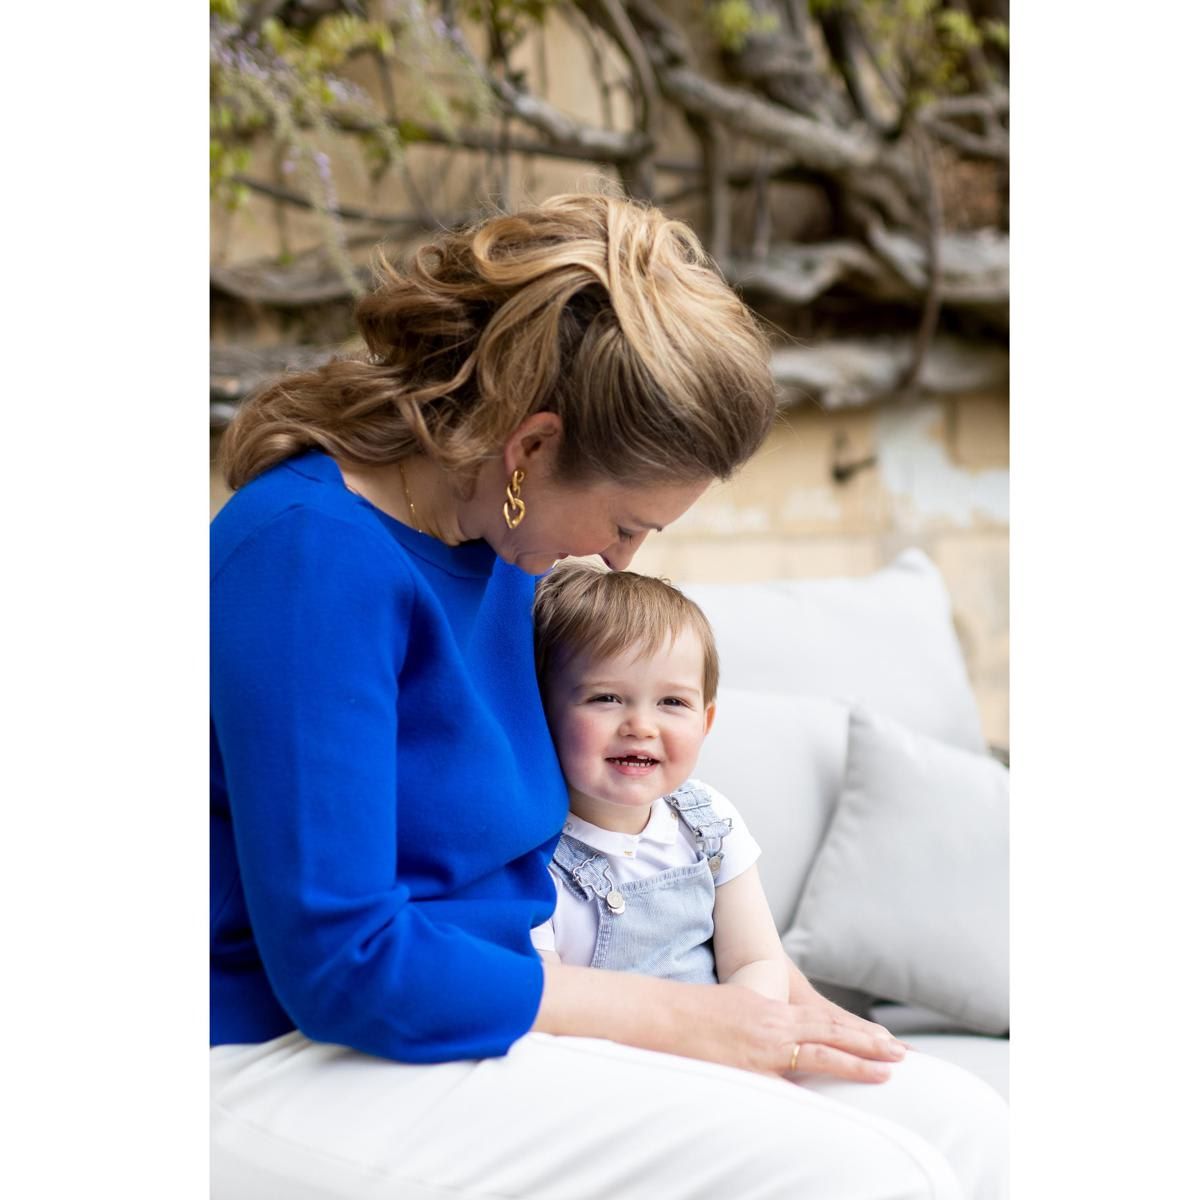 Princess Stephanie gazed lovingly at Charles in a sweet mother-son photo.